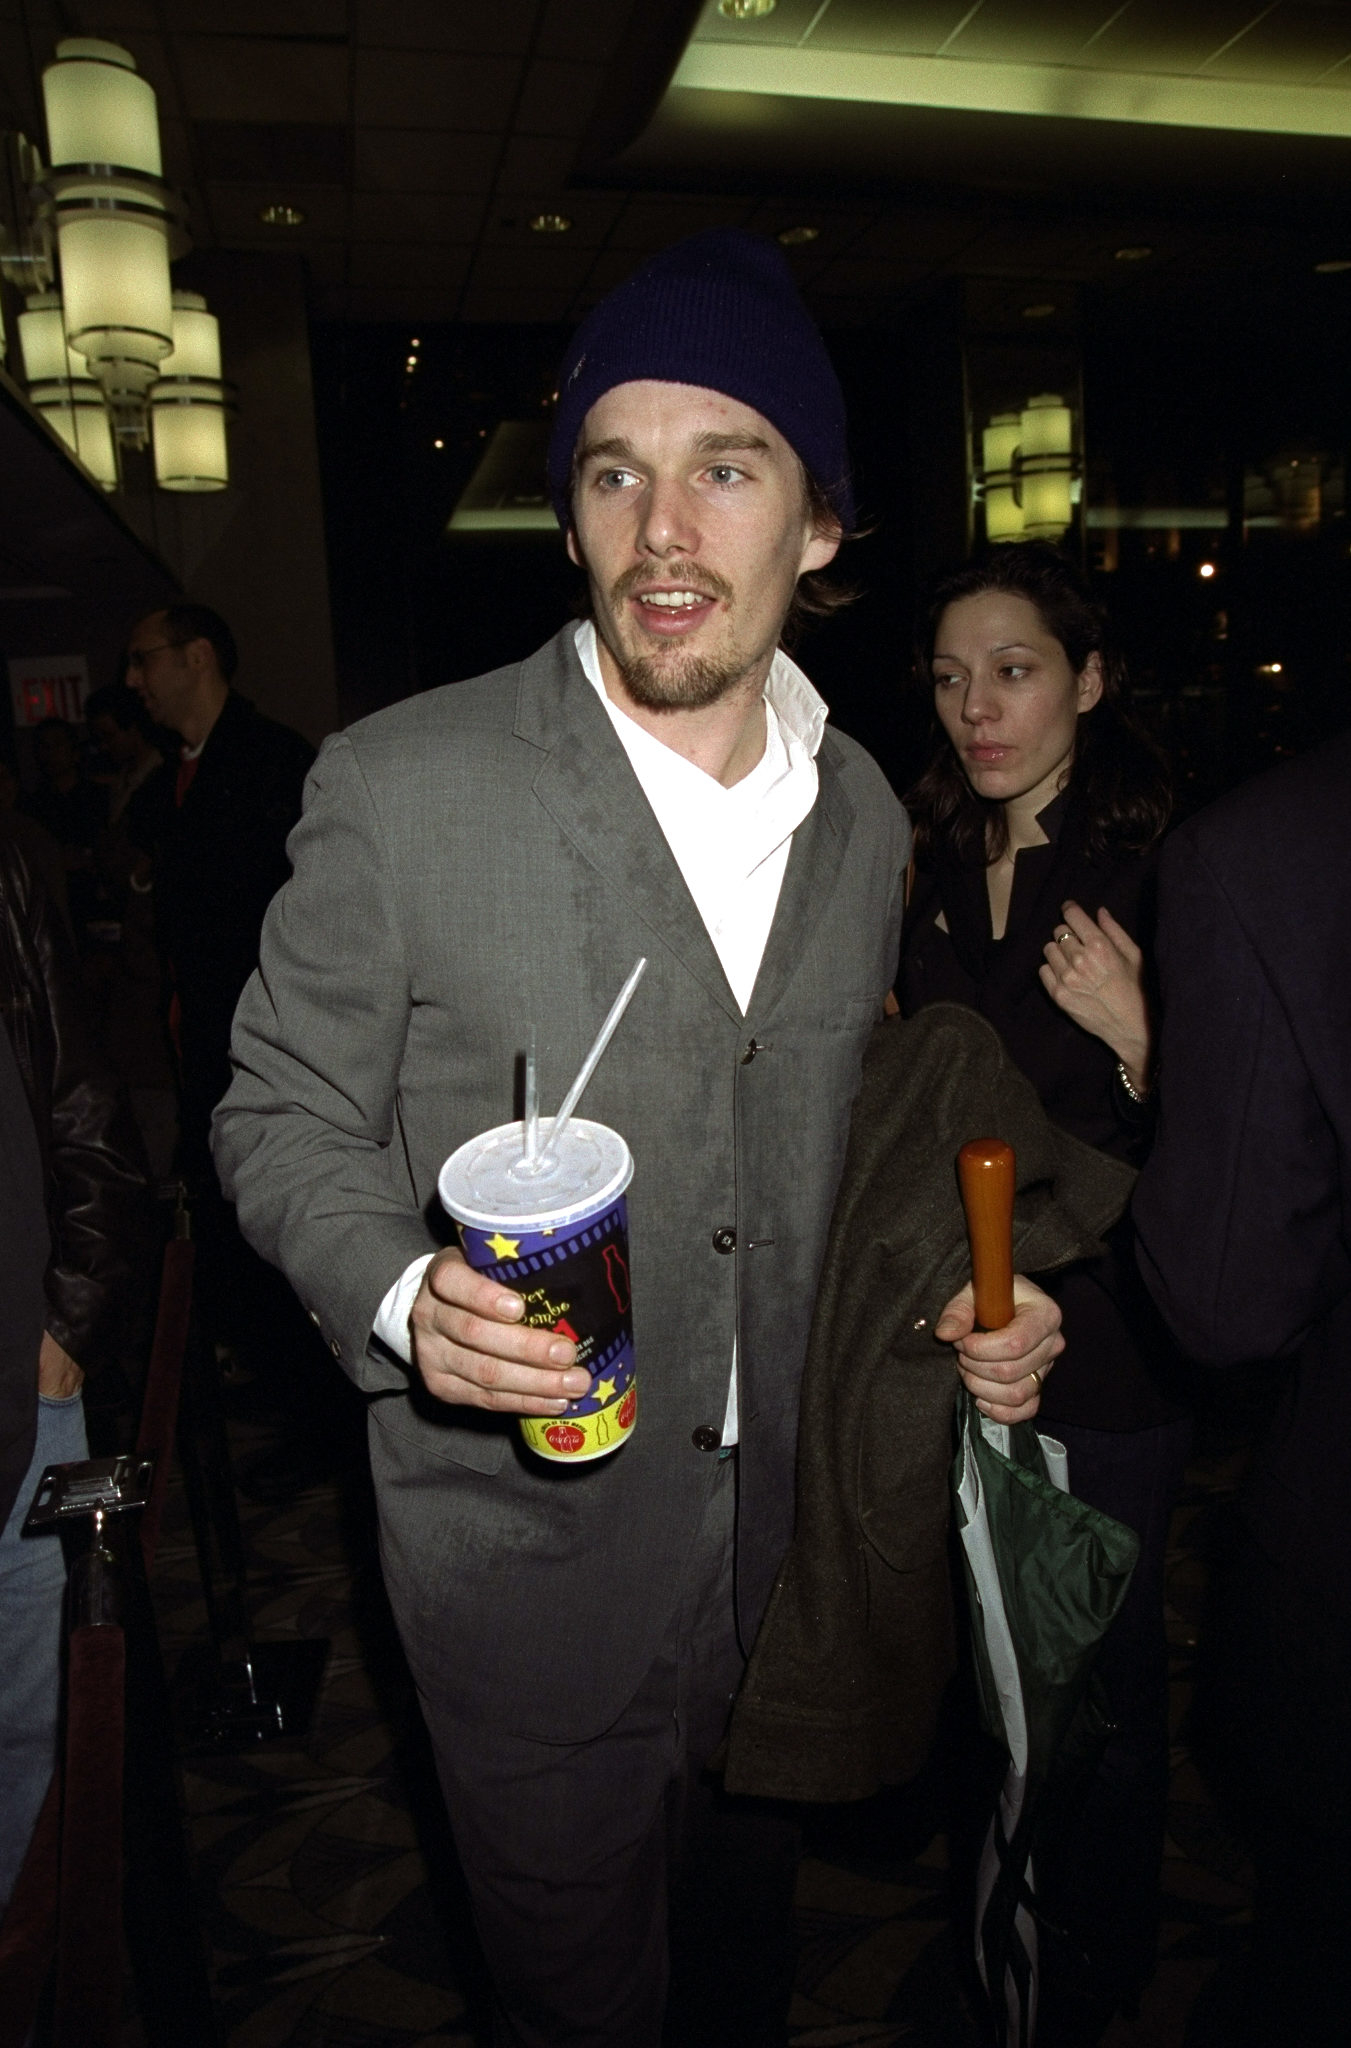 Ethan Hawke in a beanie and casual attire with a beverage and someone beside him at an event